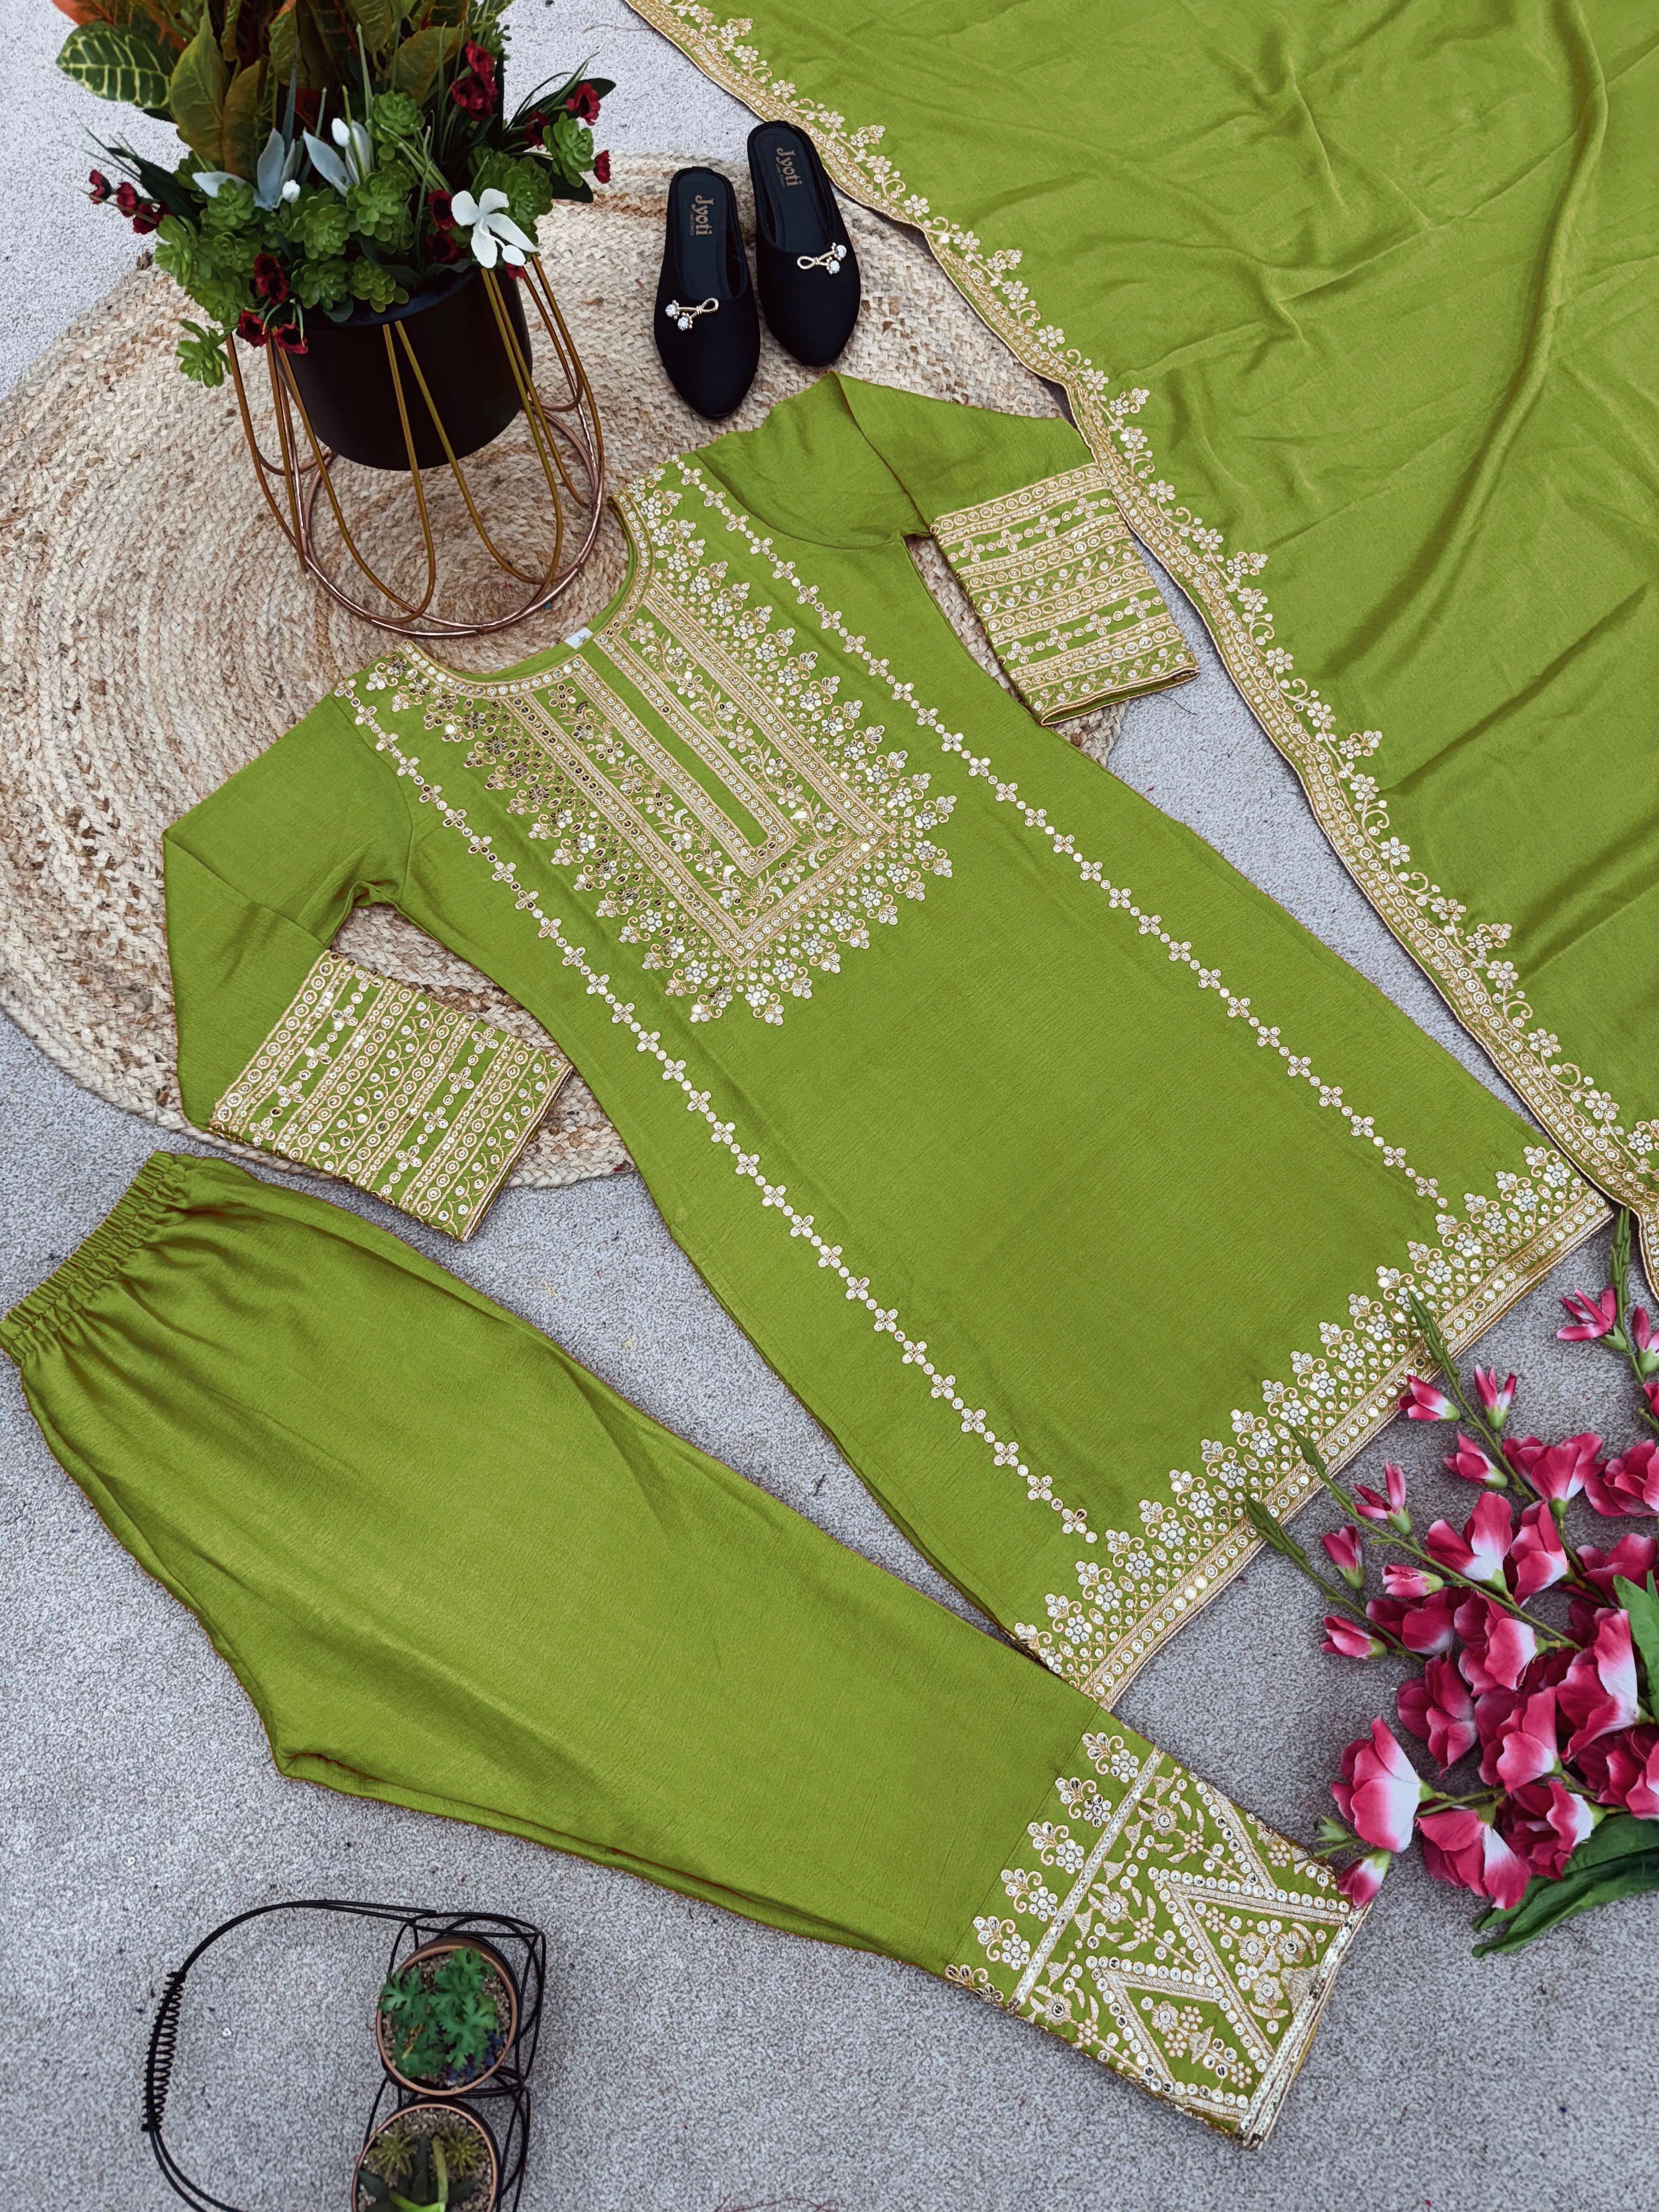 Parrot Green Color Full Sleeve Embroidery Work Salwar Suit